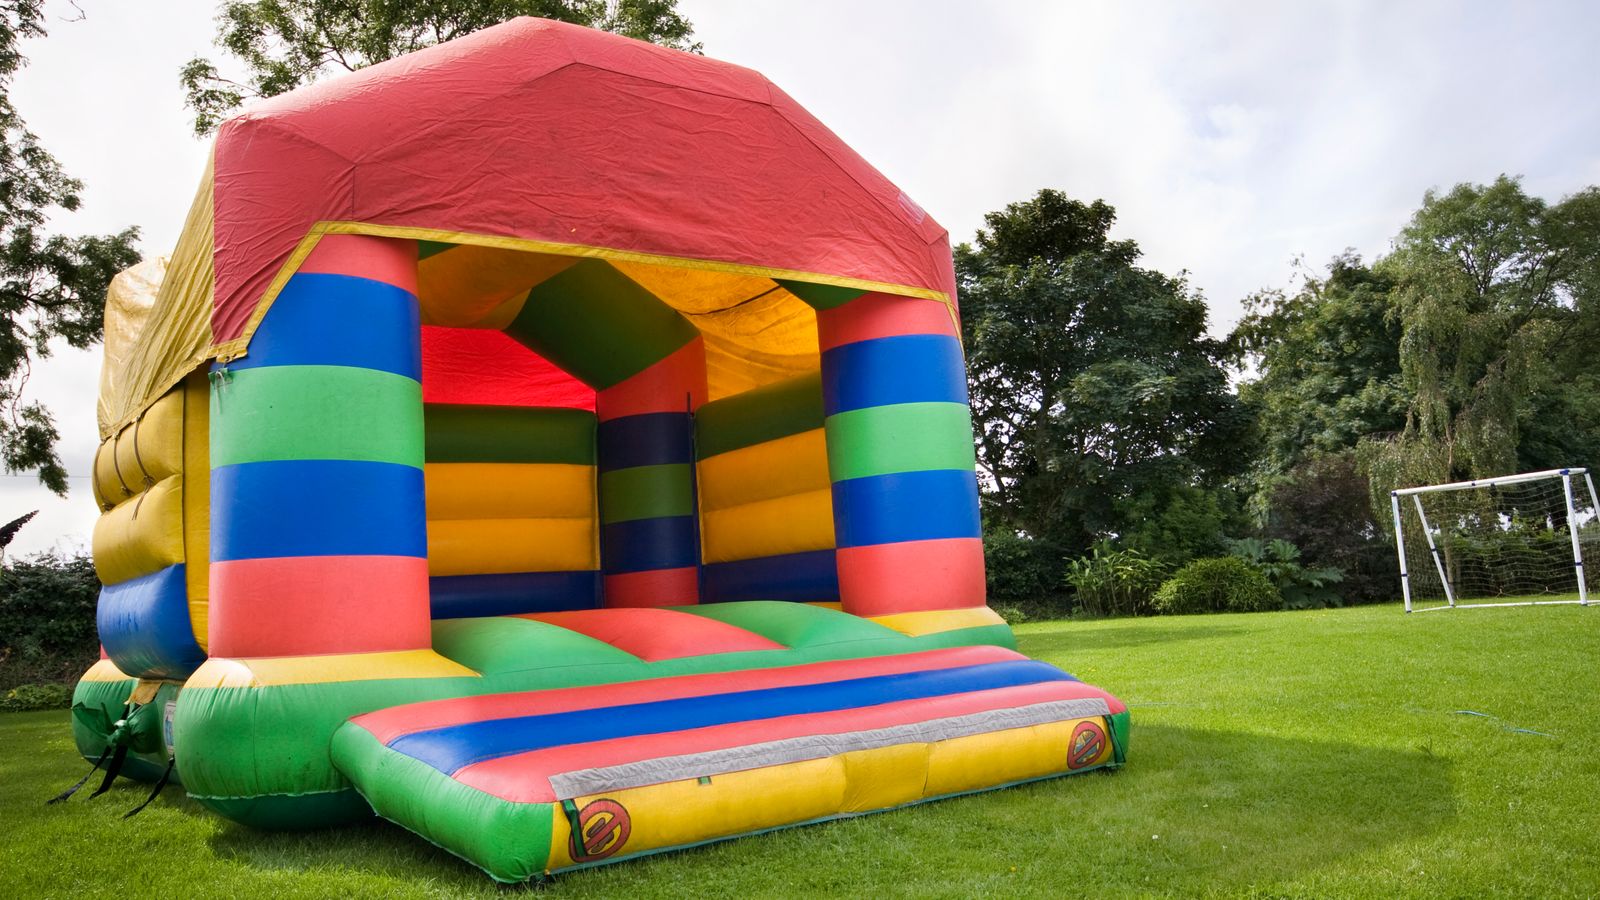 Bouncy castle ban reversed by council after backlash